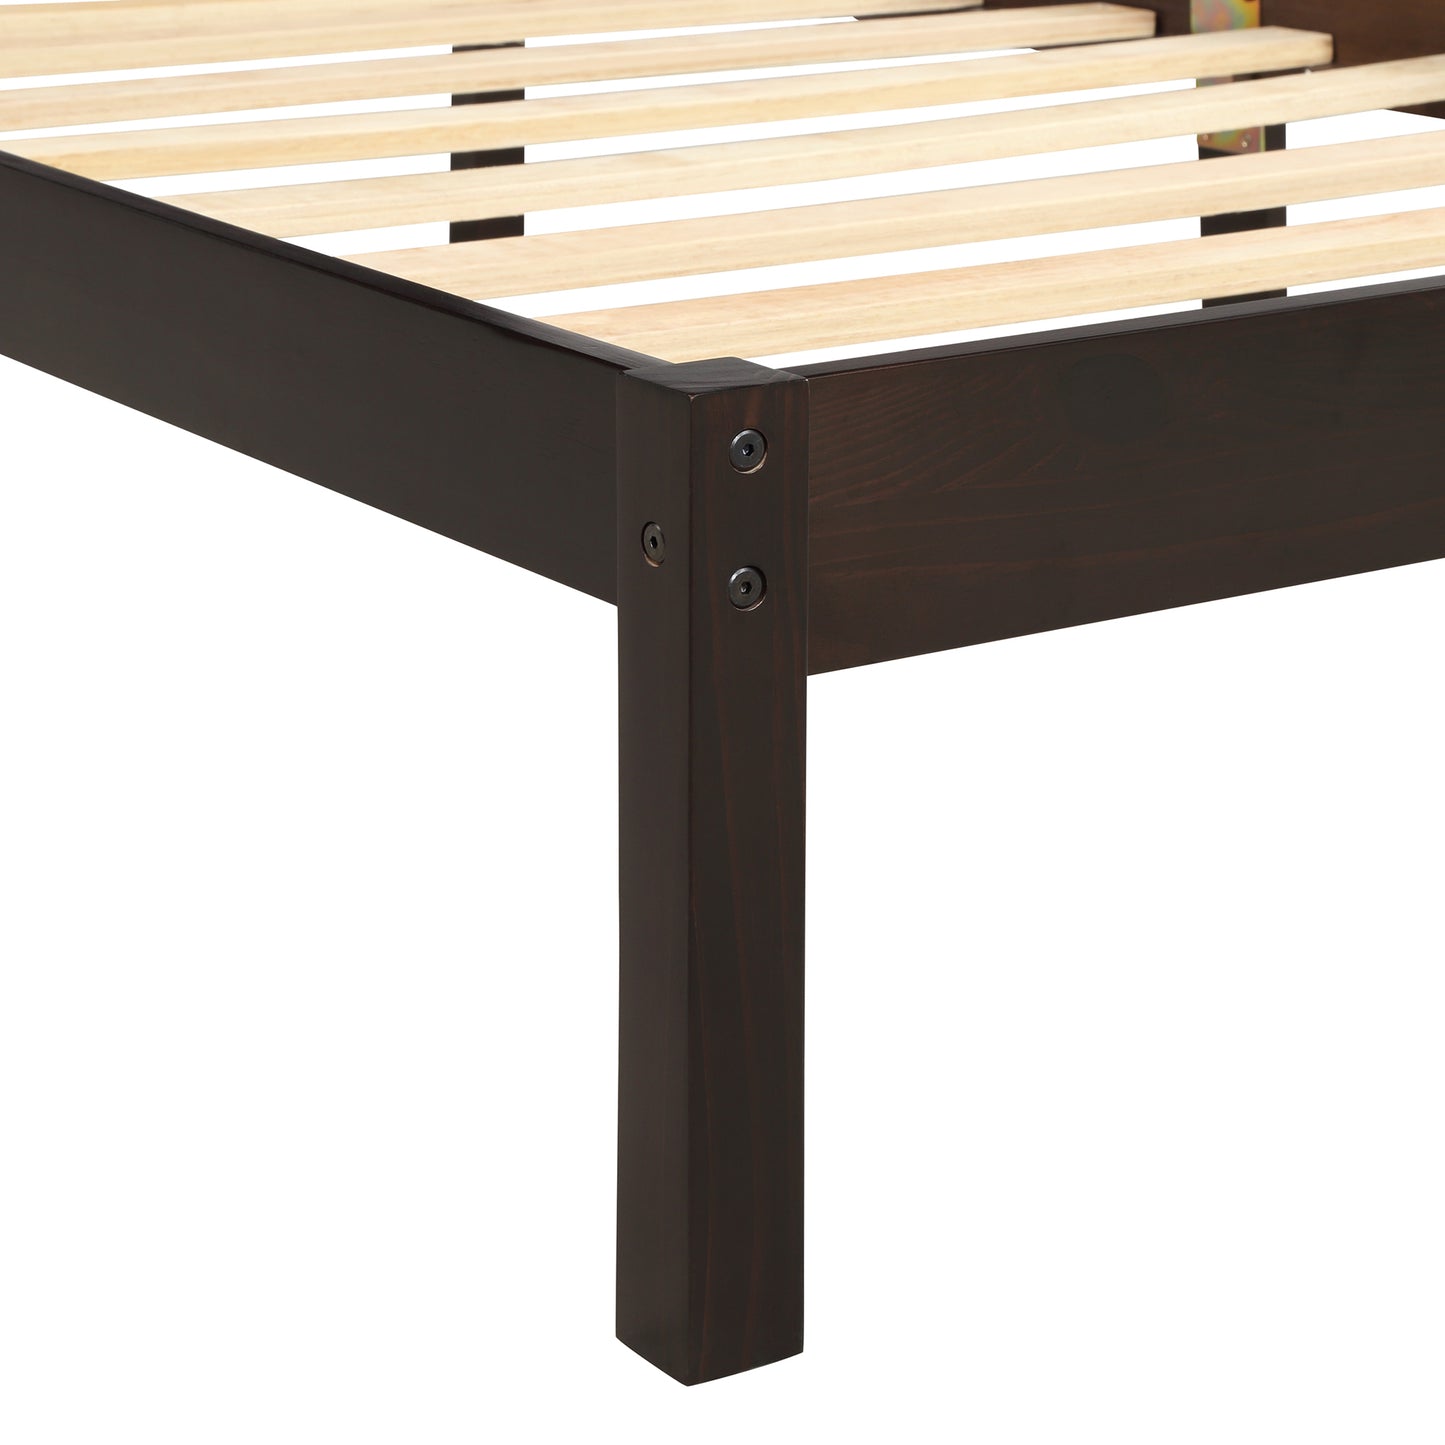 Platform Bed Frame with Headboard, Wood Slat Support, No Box Spring Needed